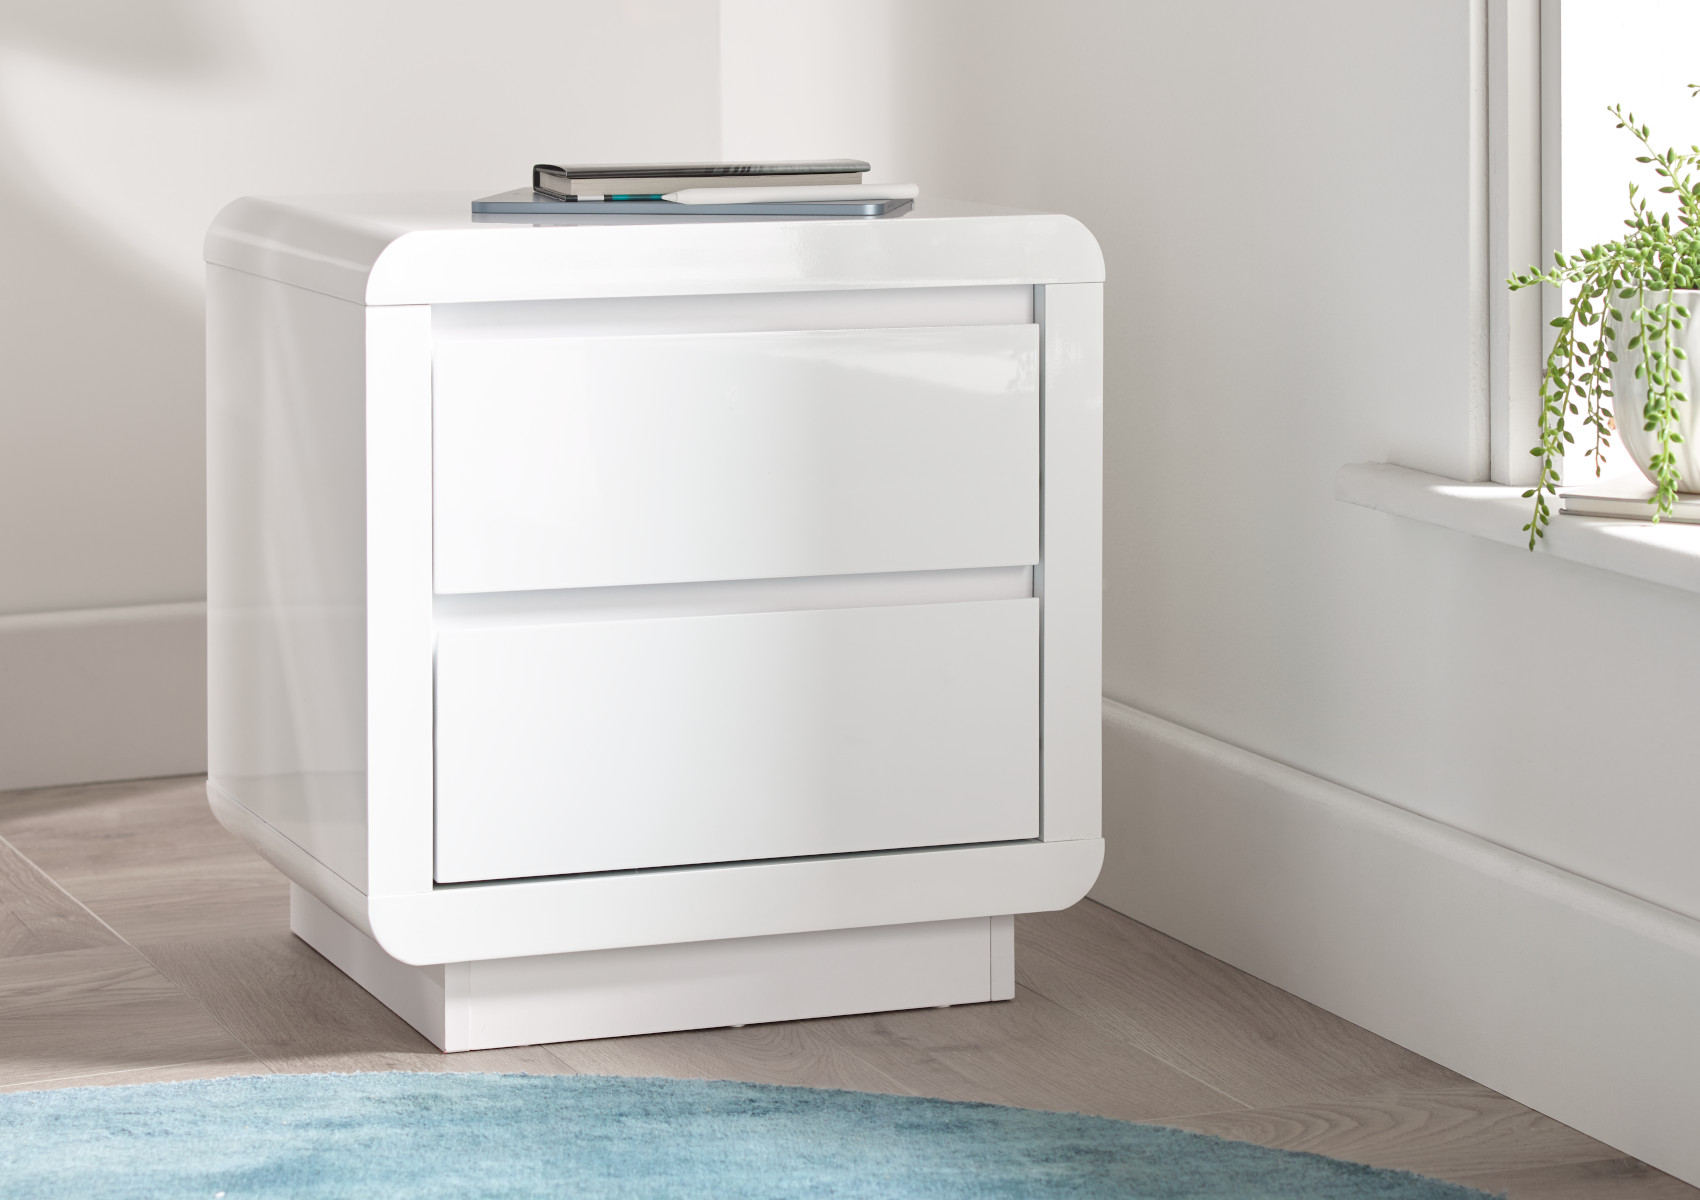 View Marlow White High Gloss 2 Drawer Bedside Time4Sleep information